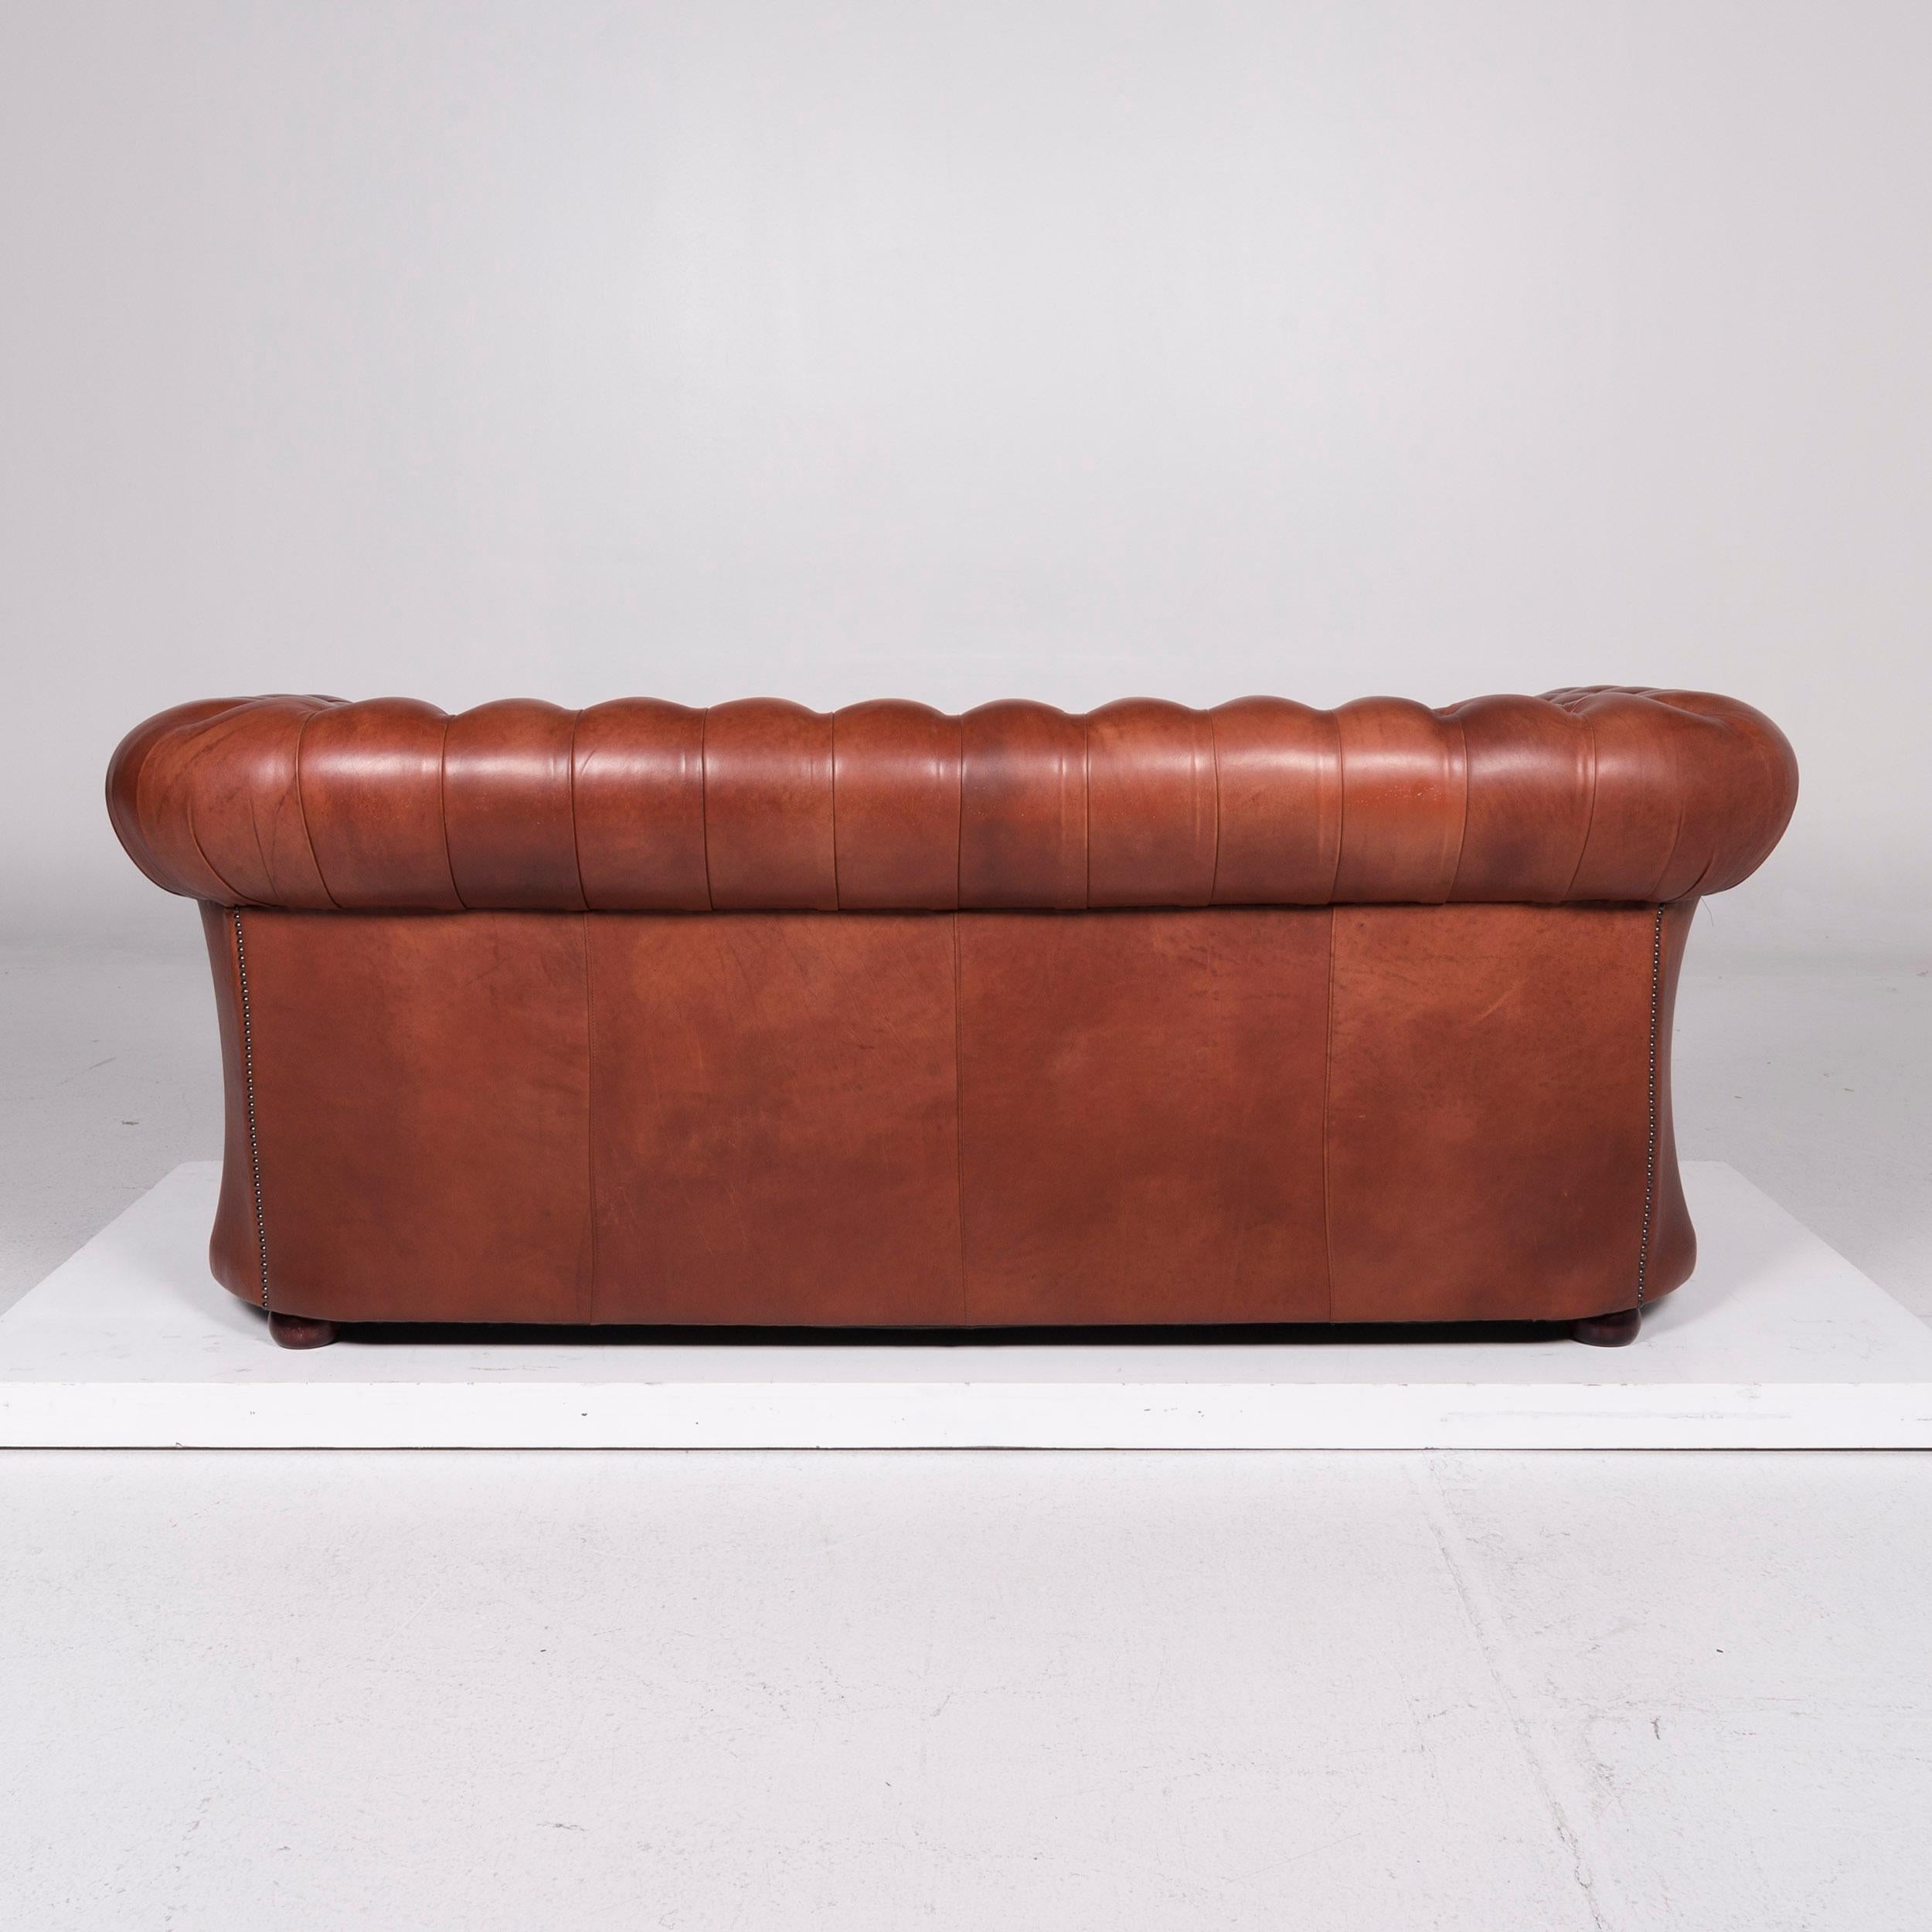 Contemporary Chesterfield Leather Sofa Red Brown Three-Seat Couch Retro